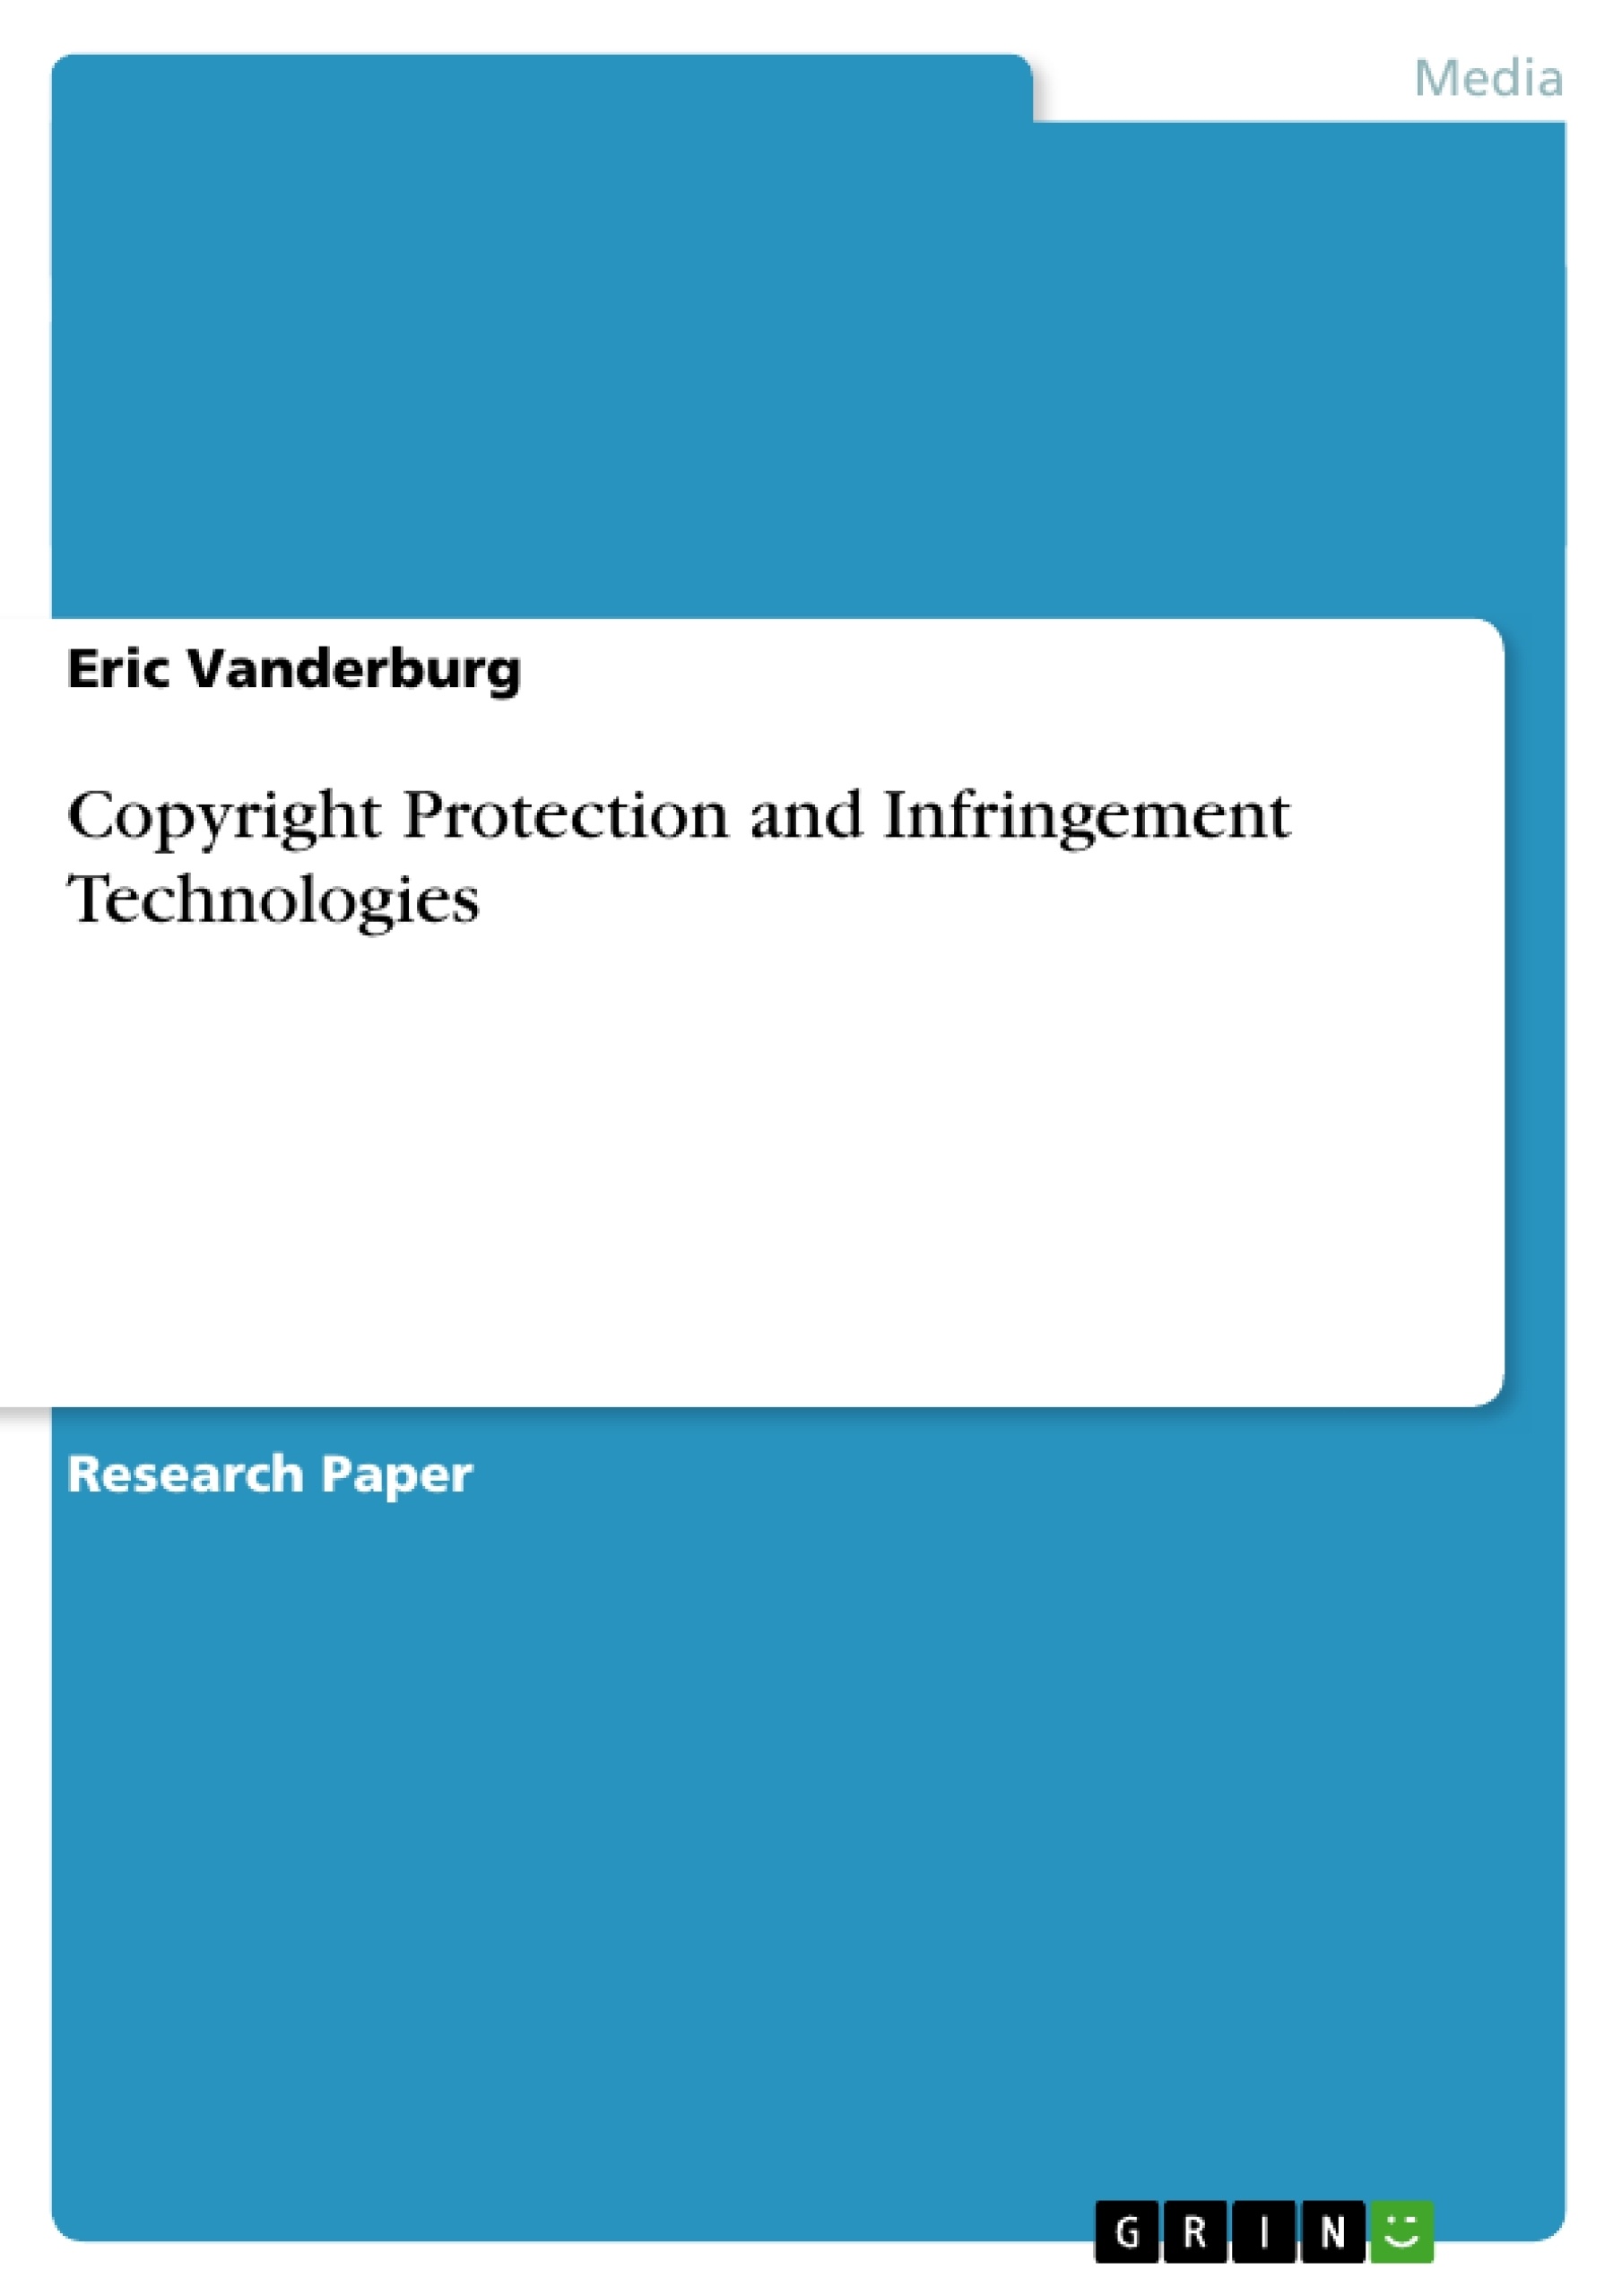 Title: Copyright Protection and Infringement Technologies